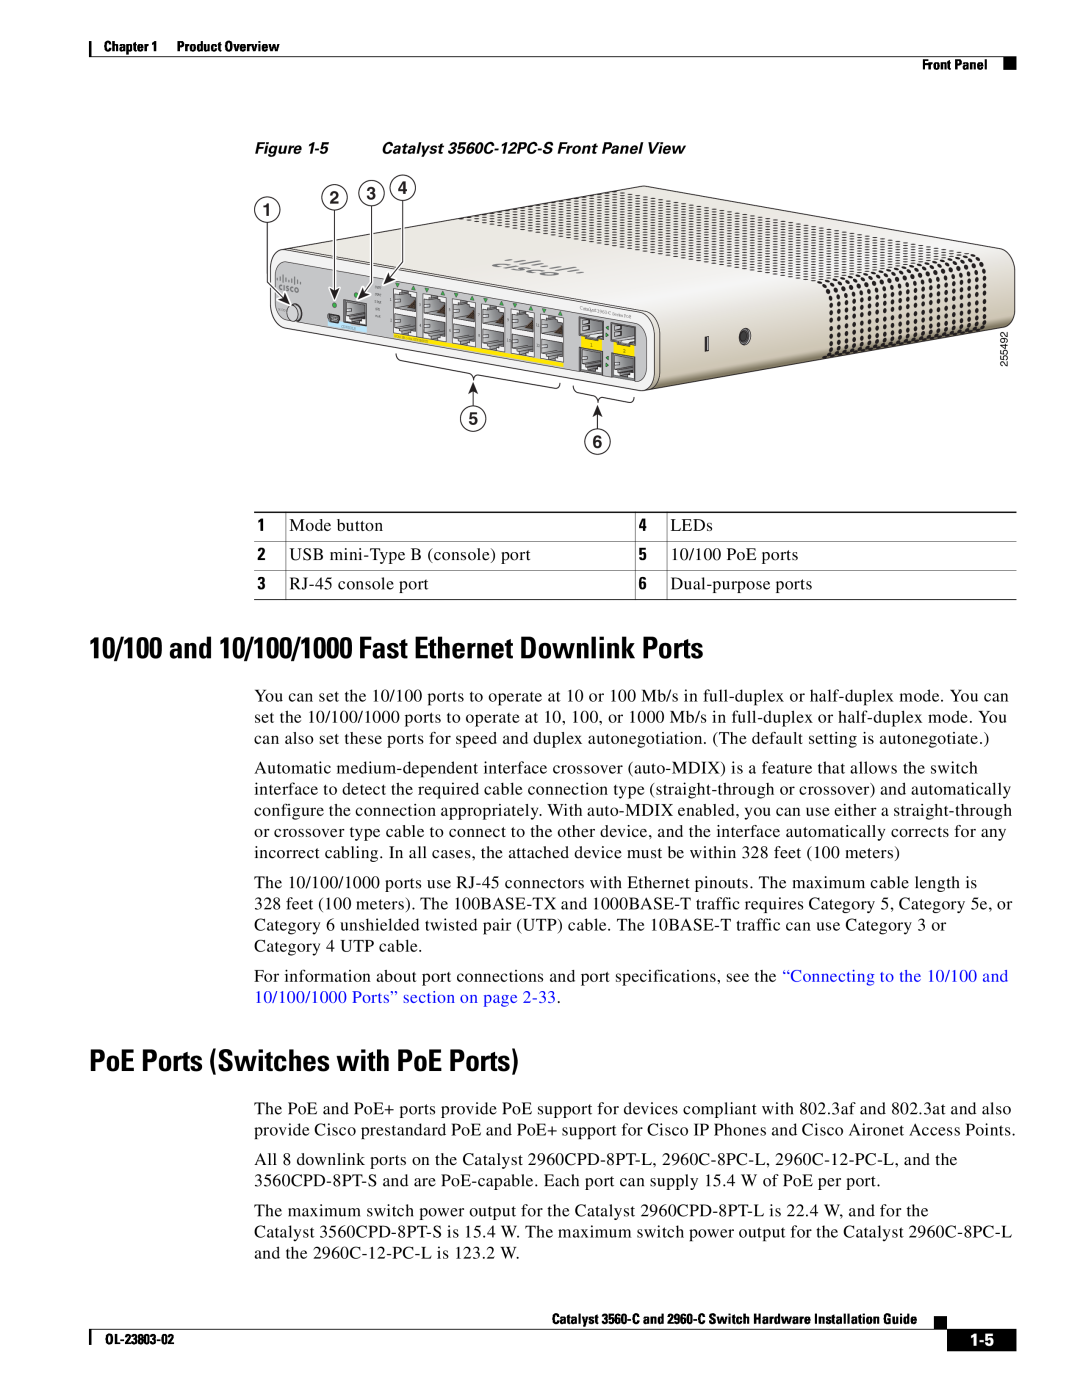 Cisco Systems 3560-C manual 10/100 and 10/100/1000 Fast Ethernet Downlink Ports, PoE Ports Switches with PoE Ports 